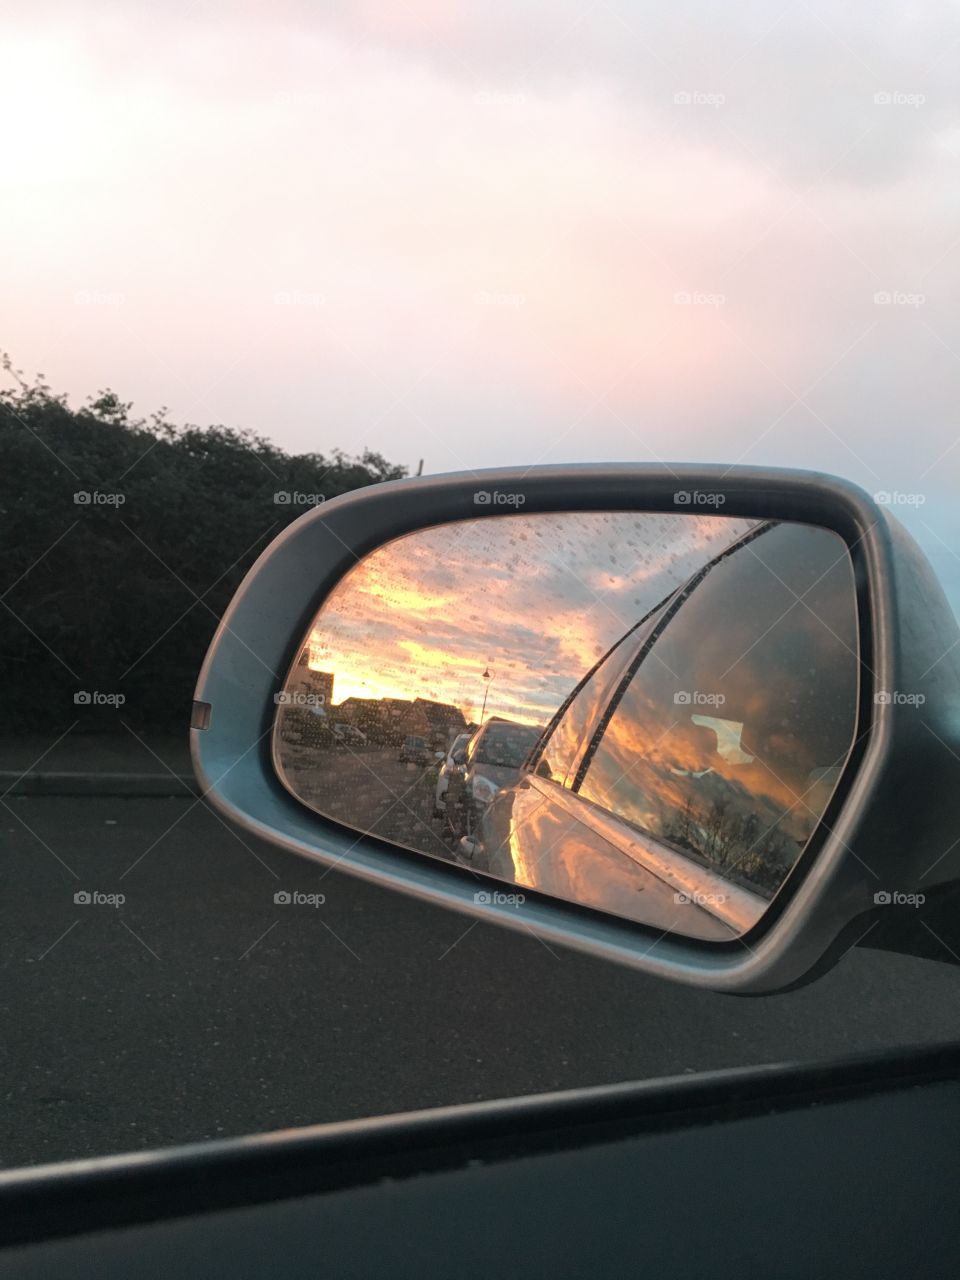 A beautiful reflection of the sunrise in a car wing mirror taken in Kent. Would look stunning in a frame or on a canvas